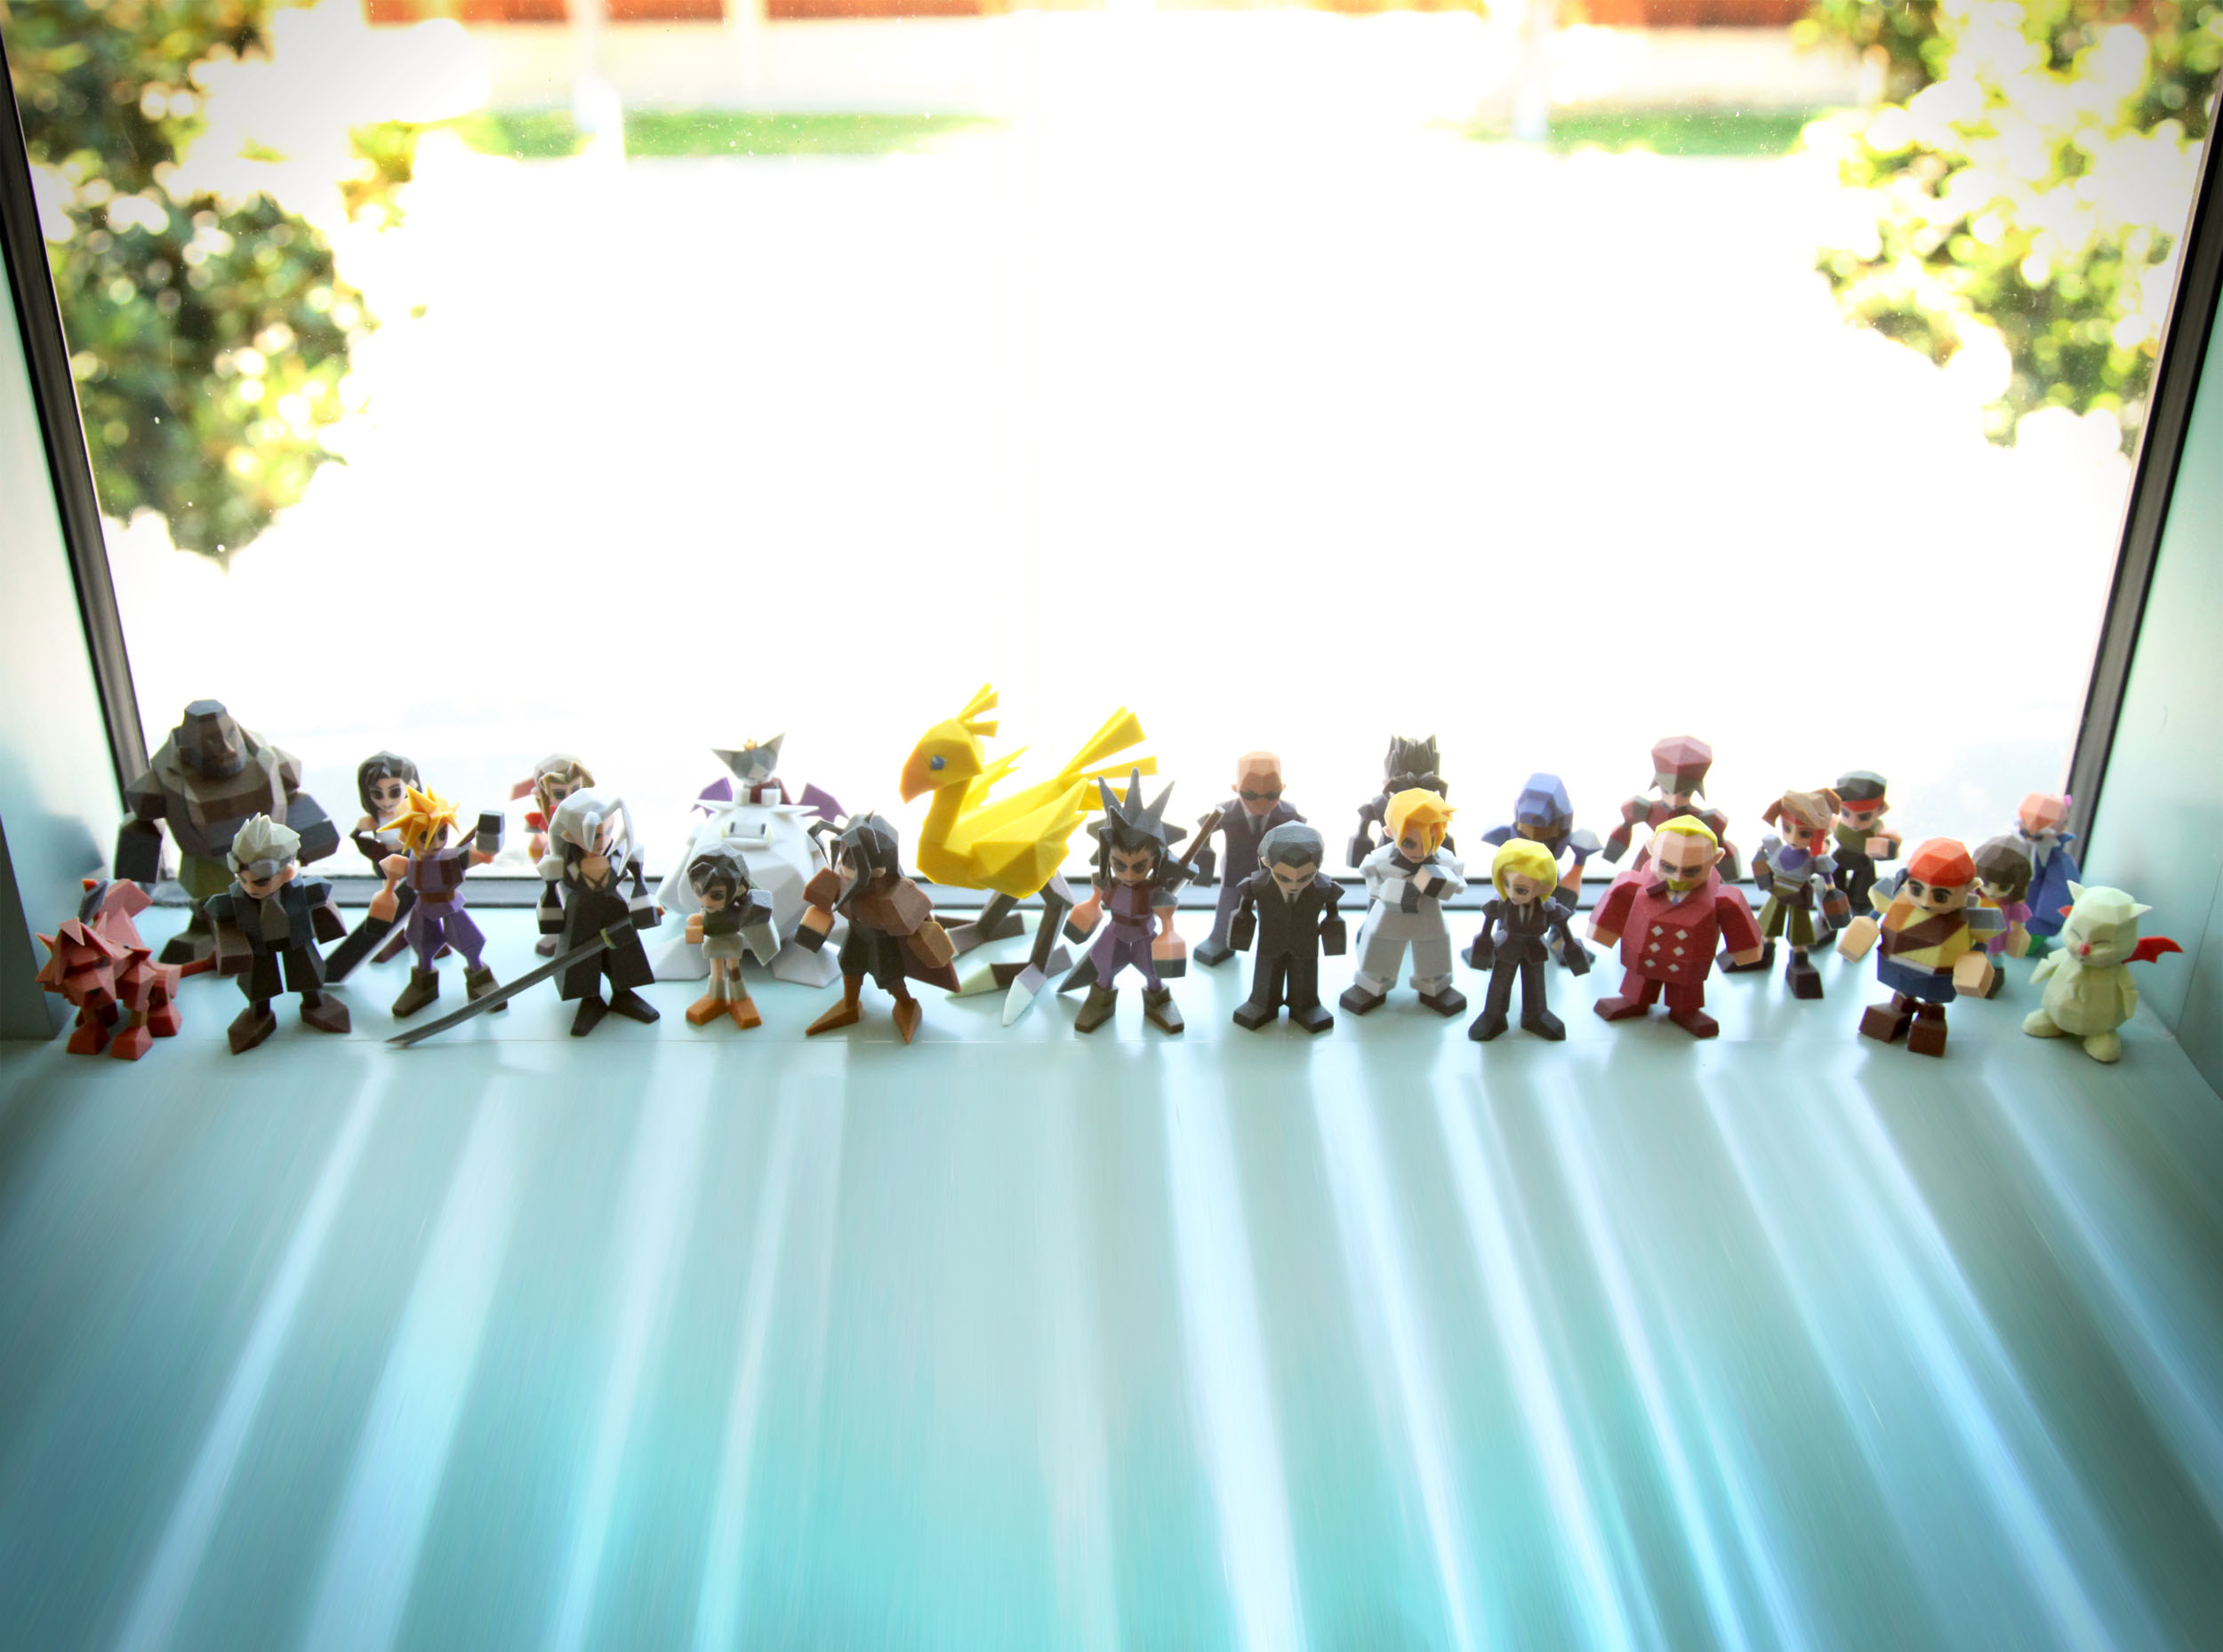 The Cast Of Final Fantasy VII, 3D-Printed